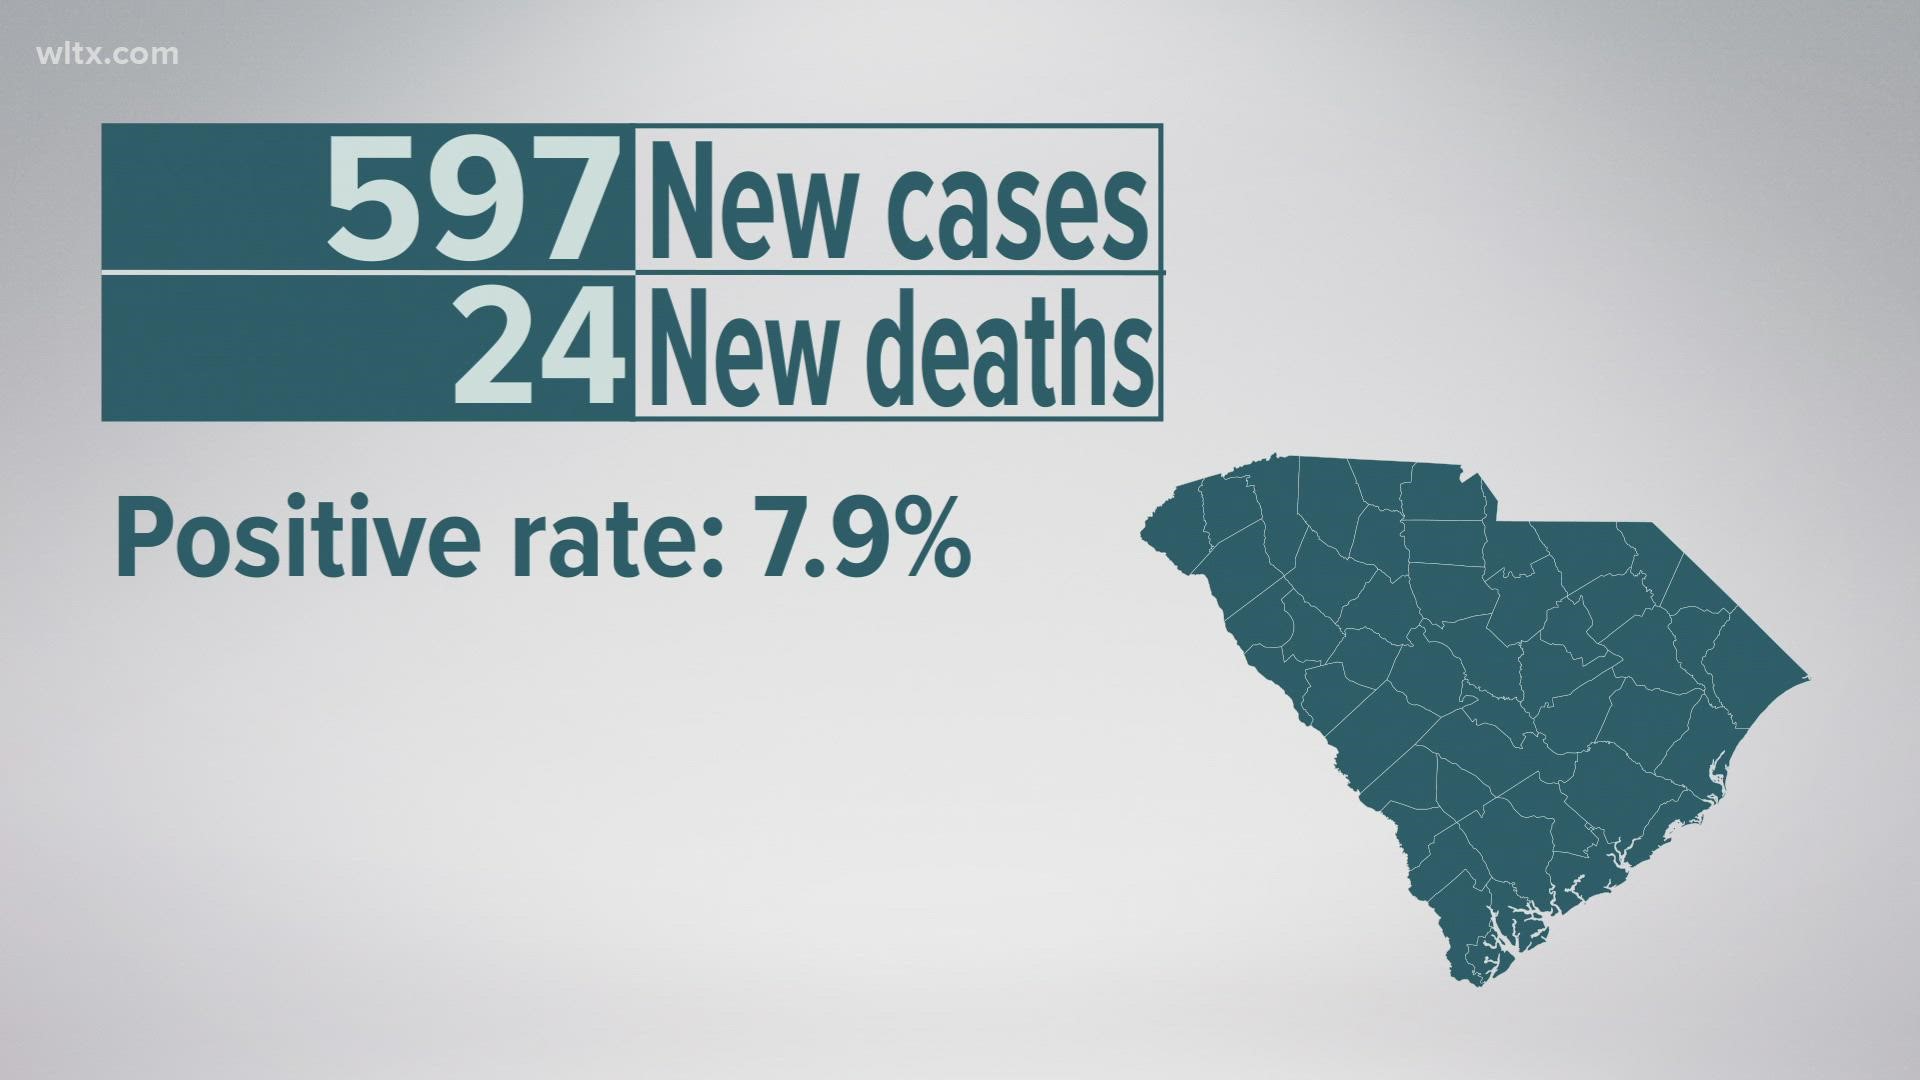 Almost 600 new cases reported and 24 deaths.